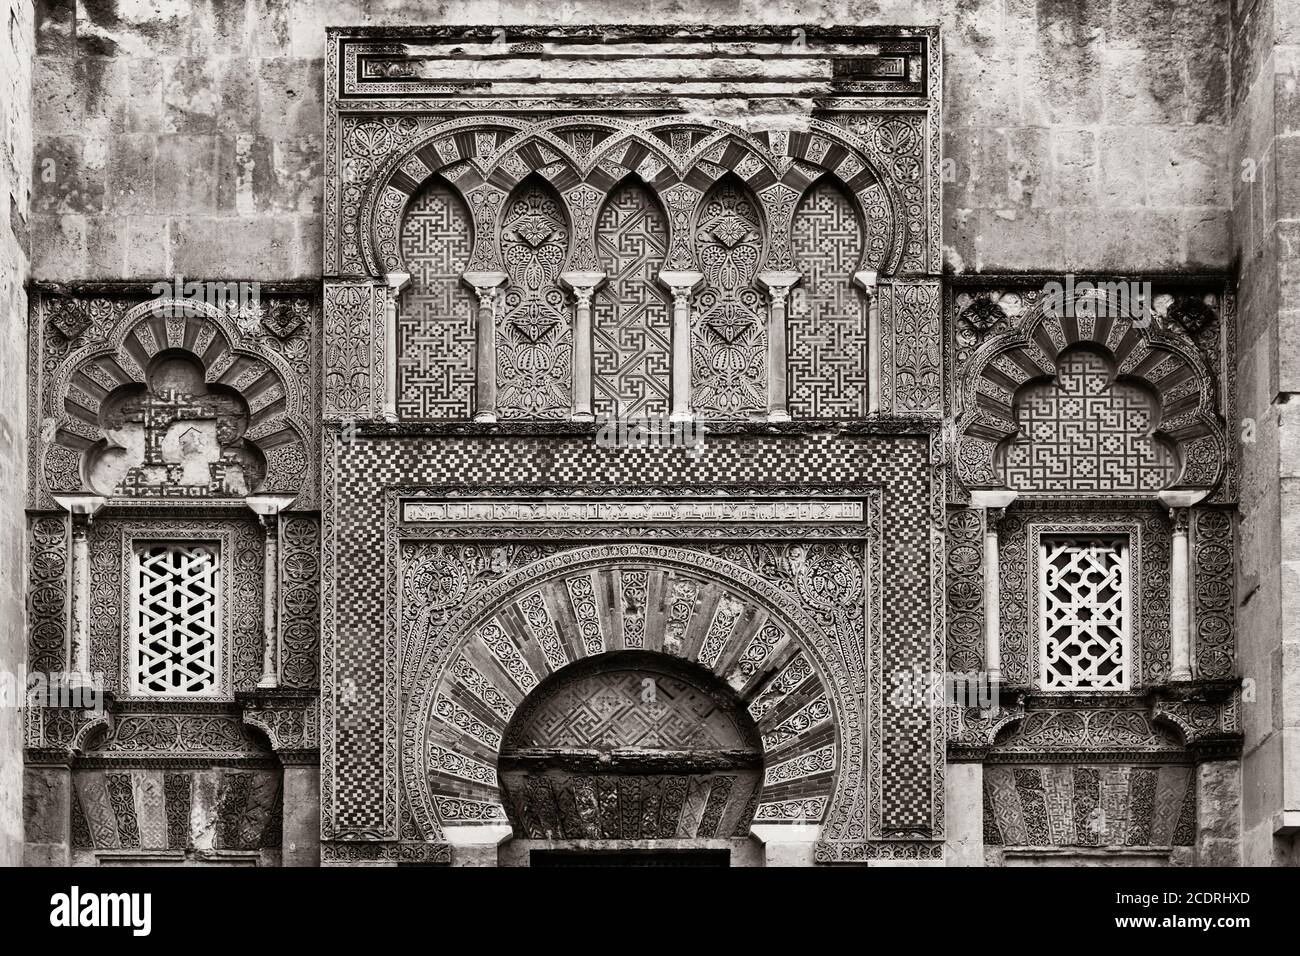 Closeup view of ancient architecture with amazing patterns in Cordoba, Spain. Stock Photo